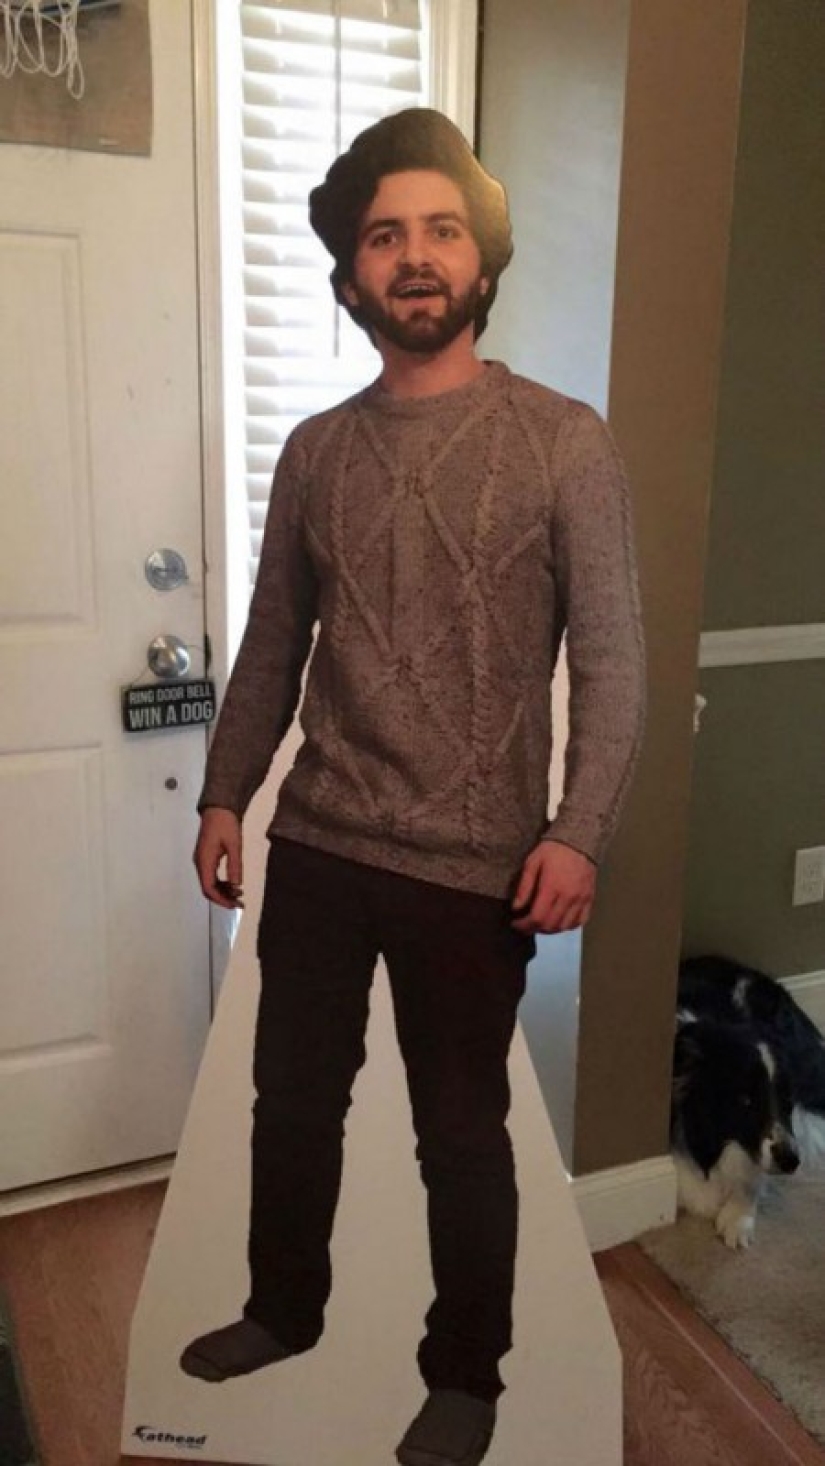 The student sent his mother a full-length photo of himself, and this is what she did with it